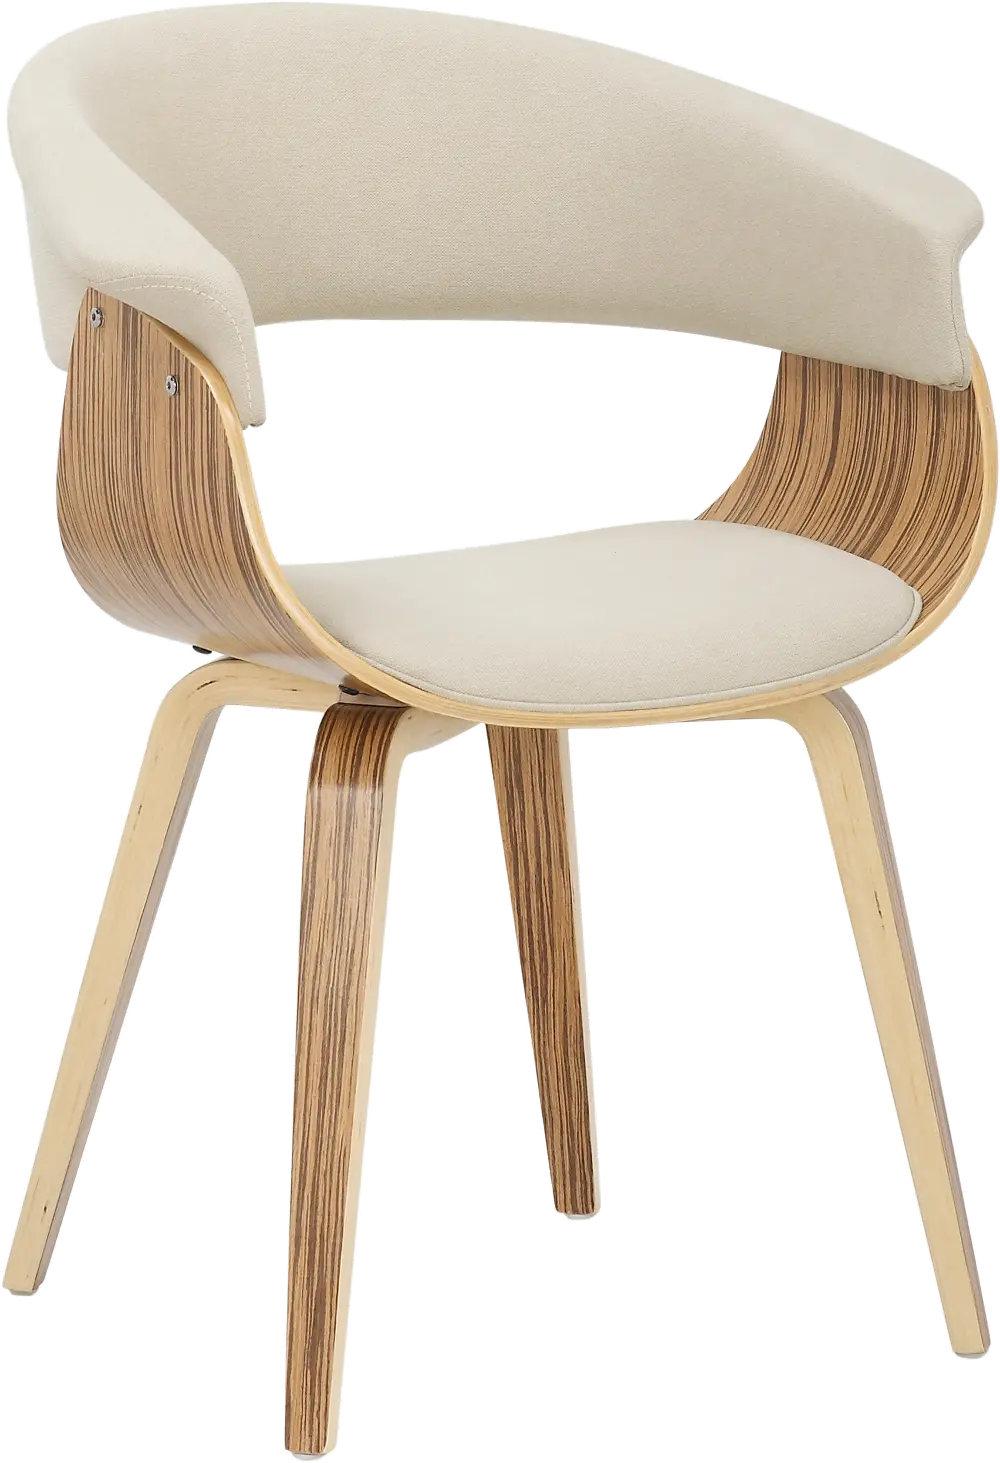 CH-VMONL ZBCR Vintage Mod Two-Tone Wood and Cream Dining Chair-1